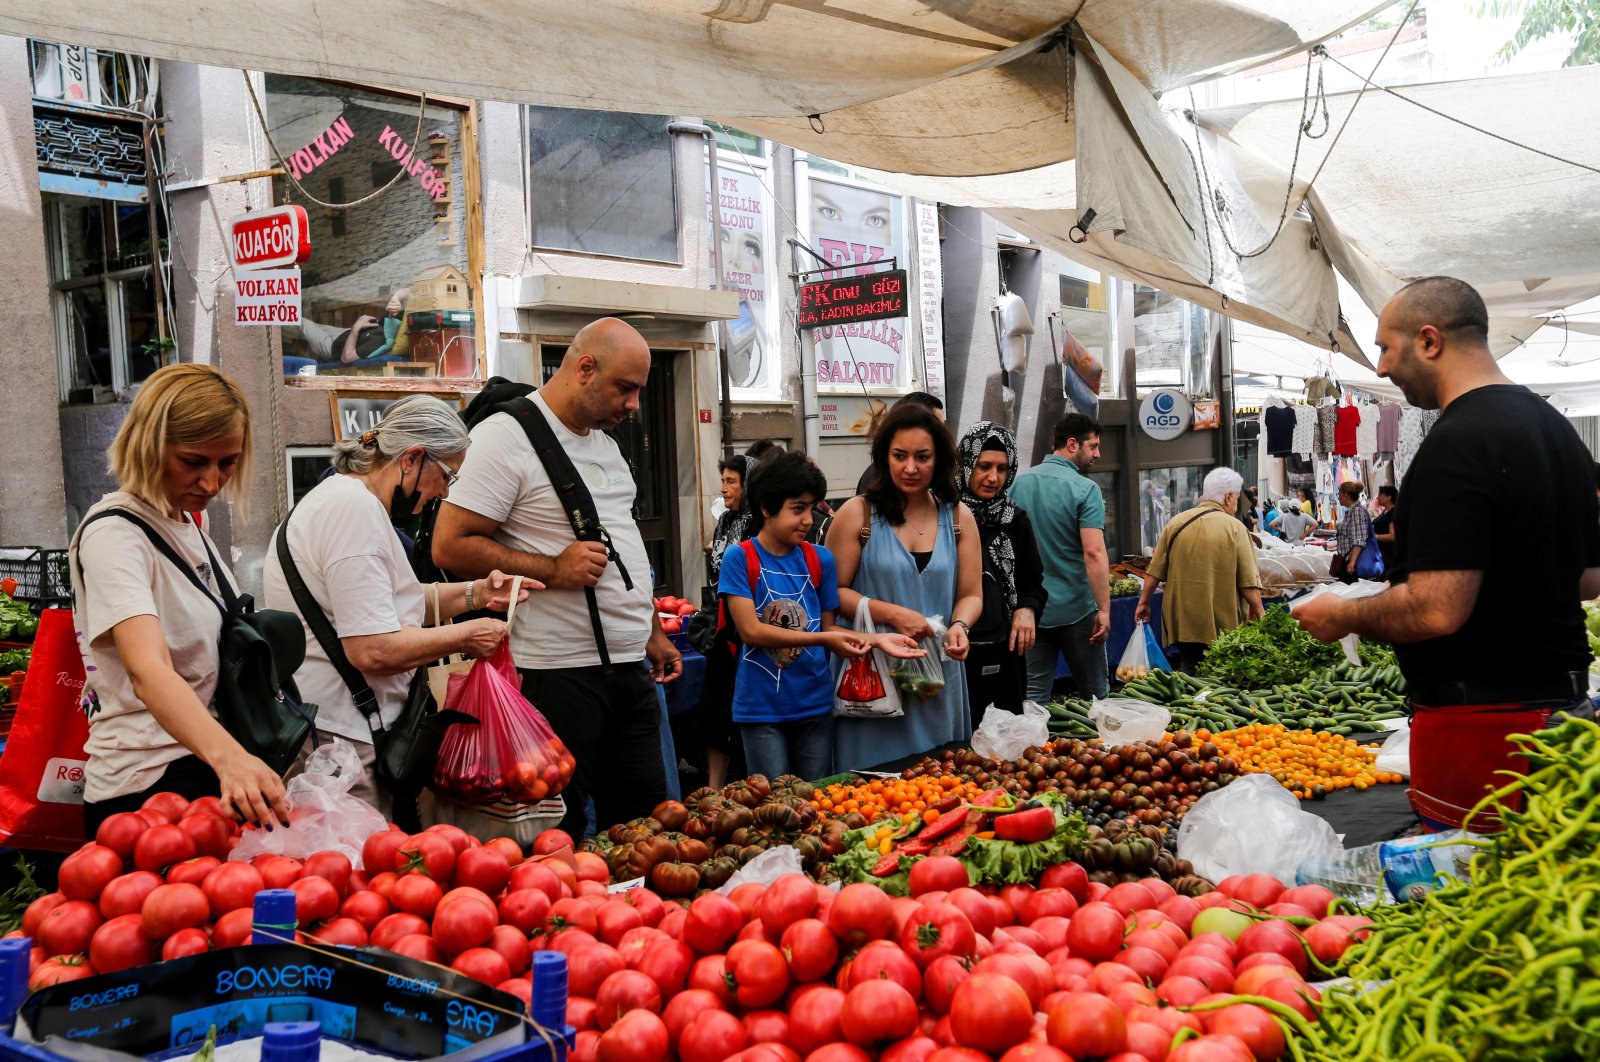 People shop at an open market in Istanbul, Turkey, June 10, 2022. (Reuters Photo)